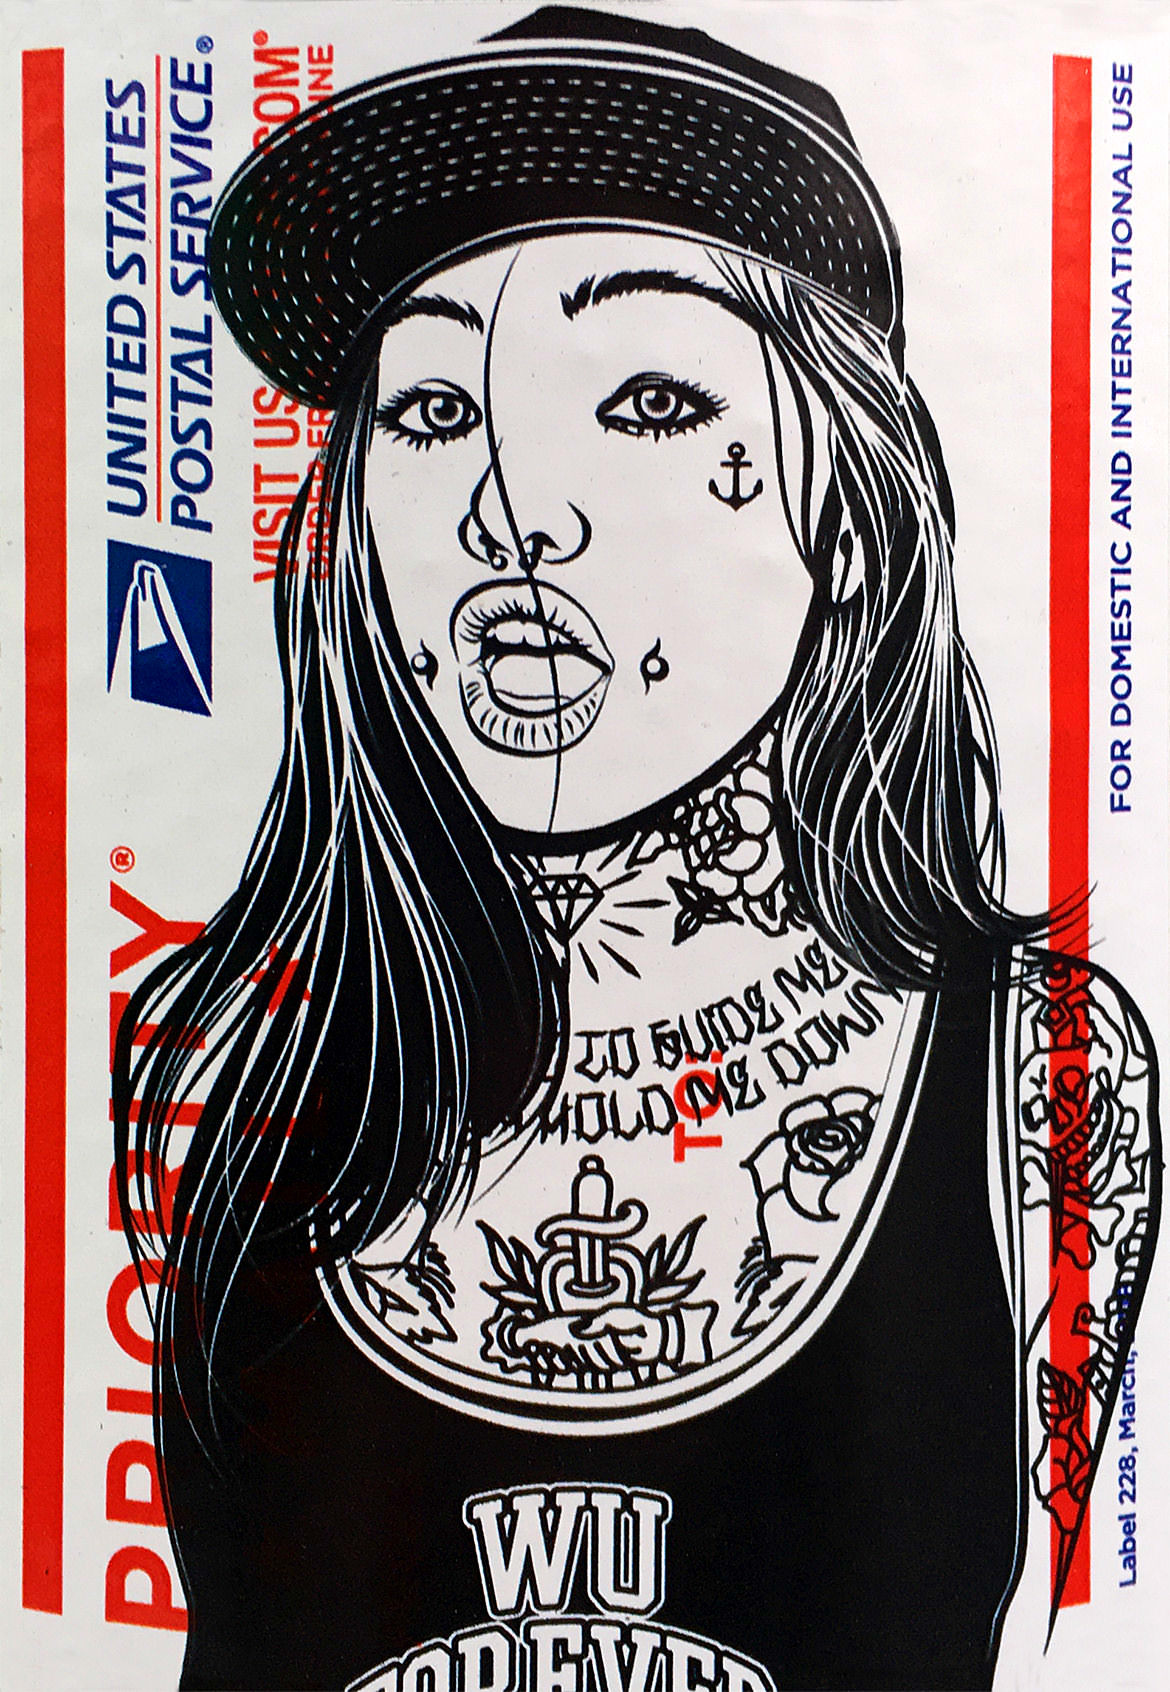 An illustration on a post office label of a tattooed girl wearing a baseball cap and tank top which reads "wu forever"